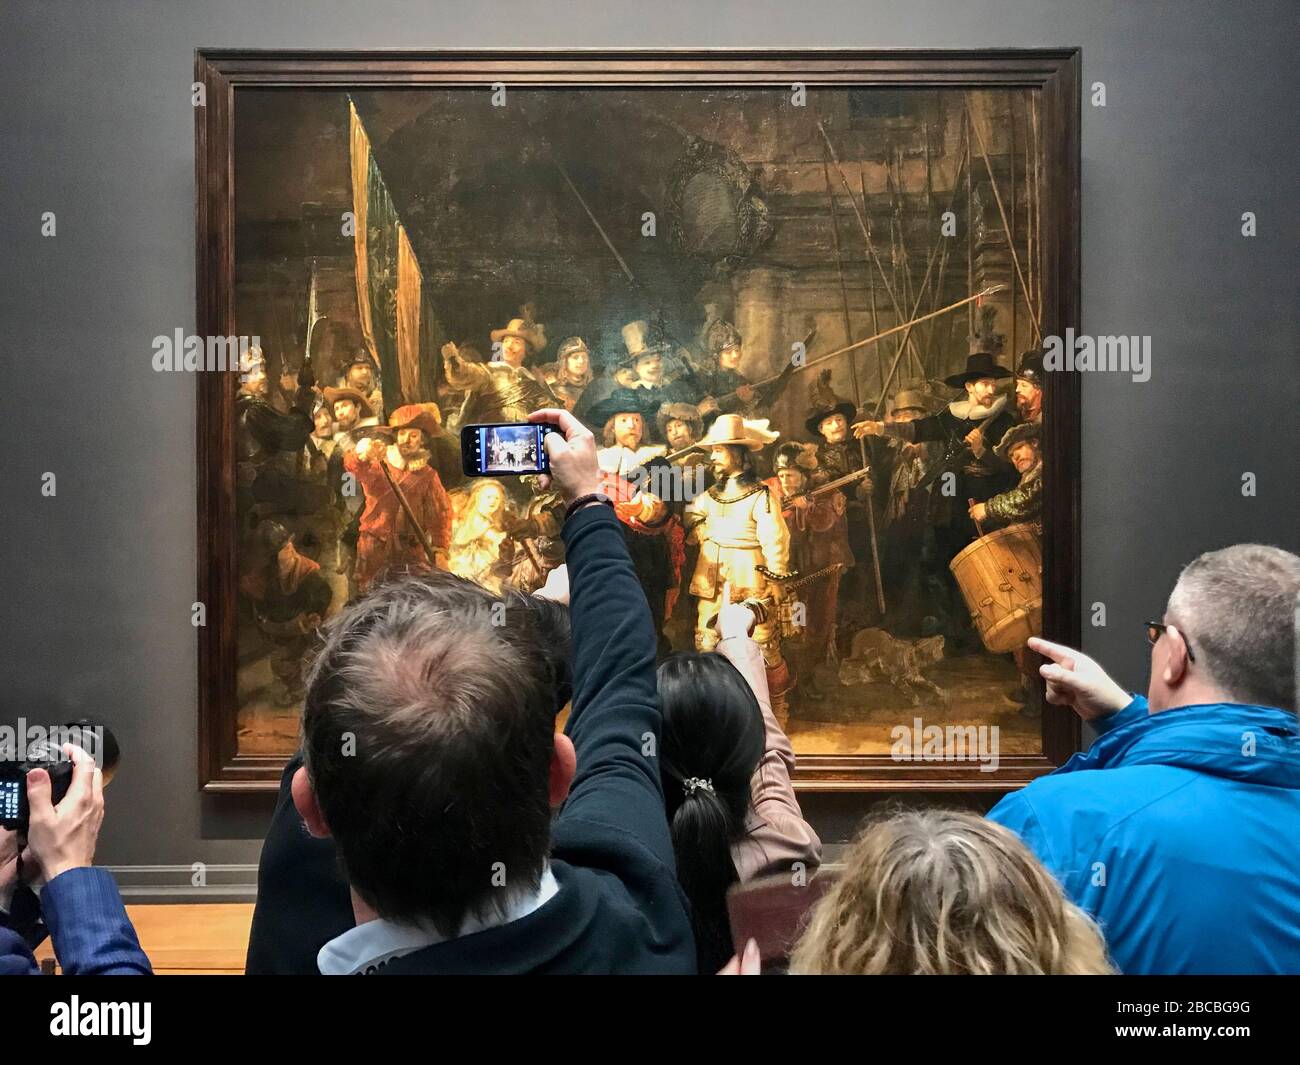 Rembrandt van Rijn's painting Night Watch in the Rijksmuseum in Amsterdam is a visitor magnet. Stock Photo